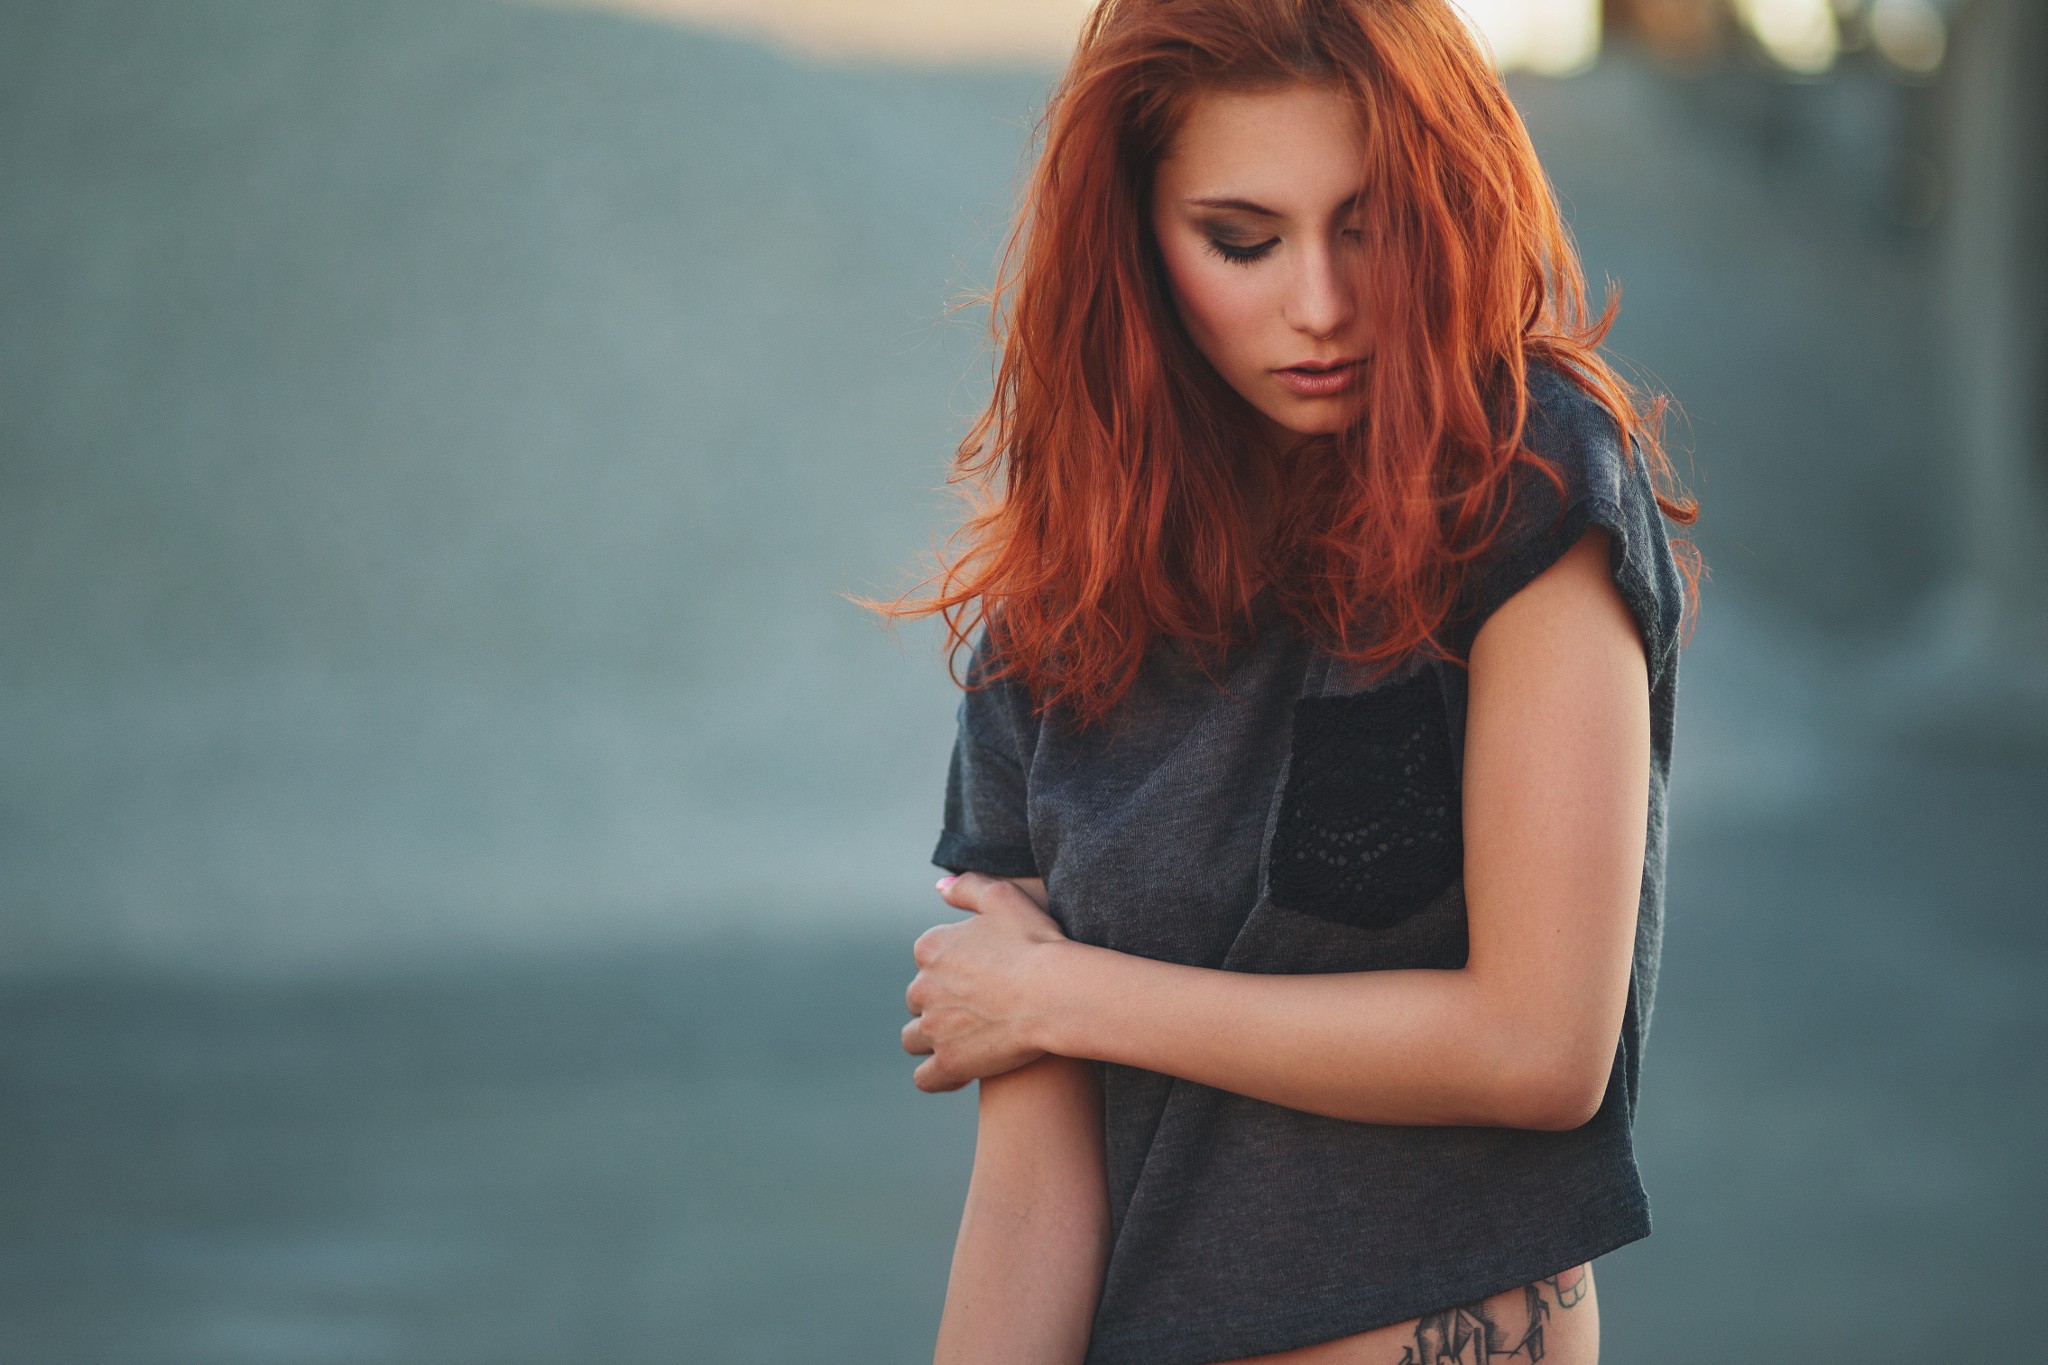 People 2048x1365 Victoria Ryzhevolosaya women model redhead face portrait nose ring T-shirt makeup arms crossed women outdoors long hair looking away dyed hair inked girls